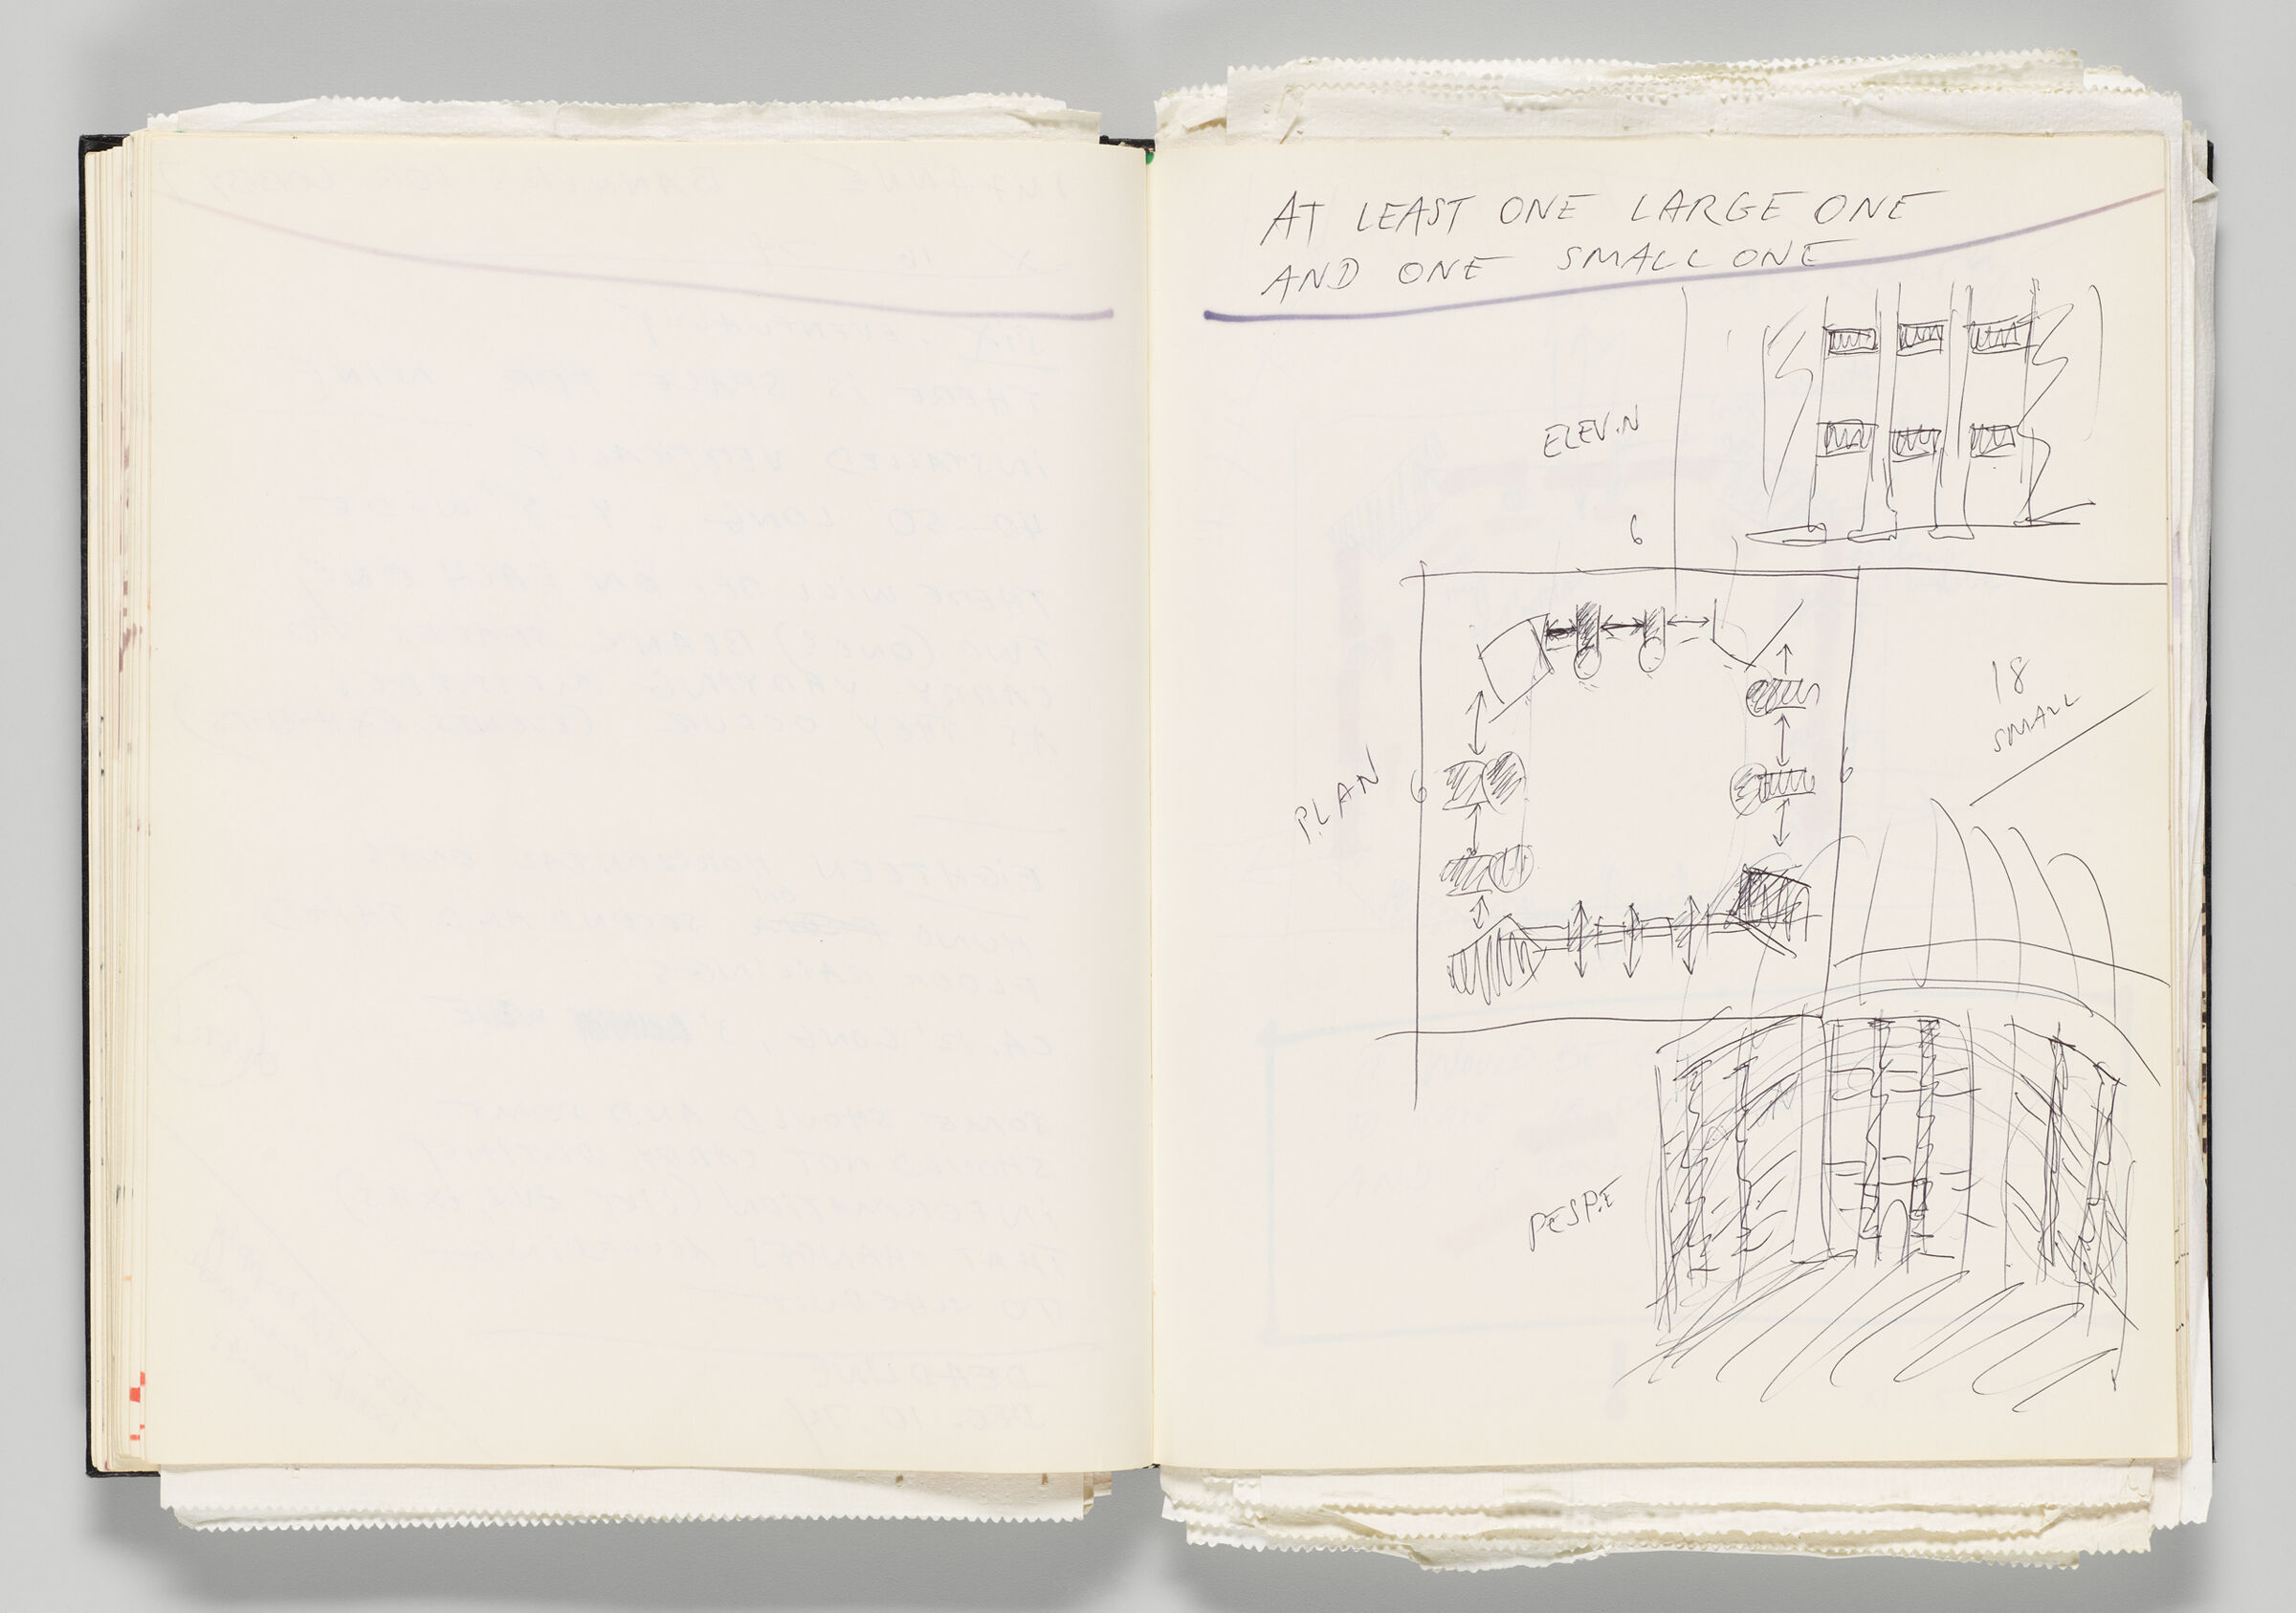 Untitled (Blank With Faint Color Transfer, Left Page); Untitled (Notes With Plan And Elevation, Right Page)